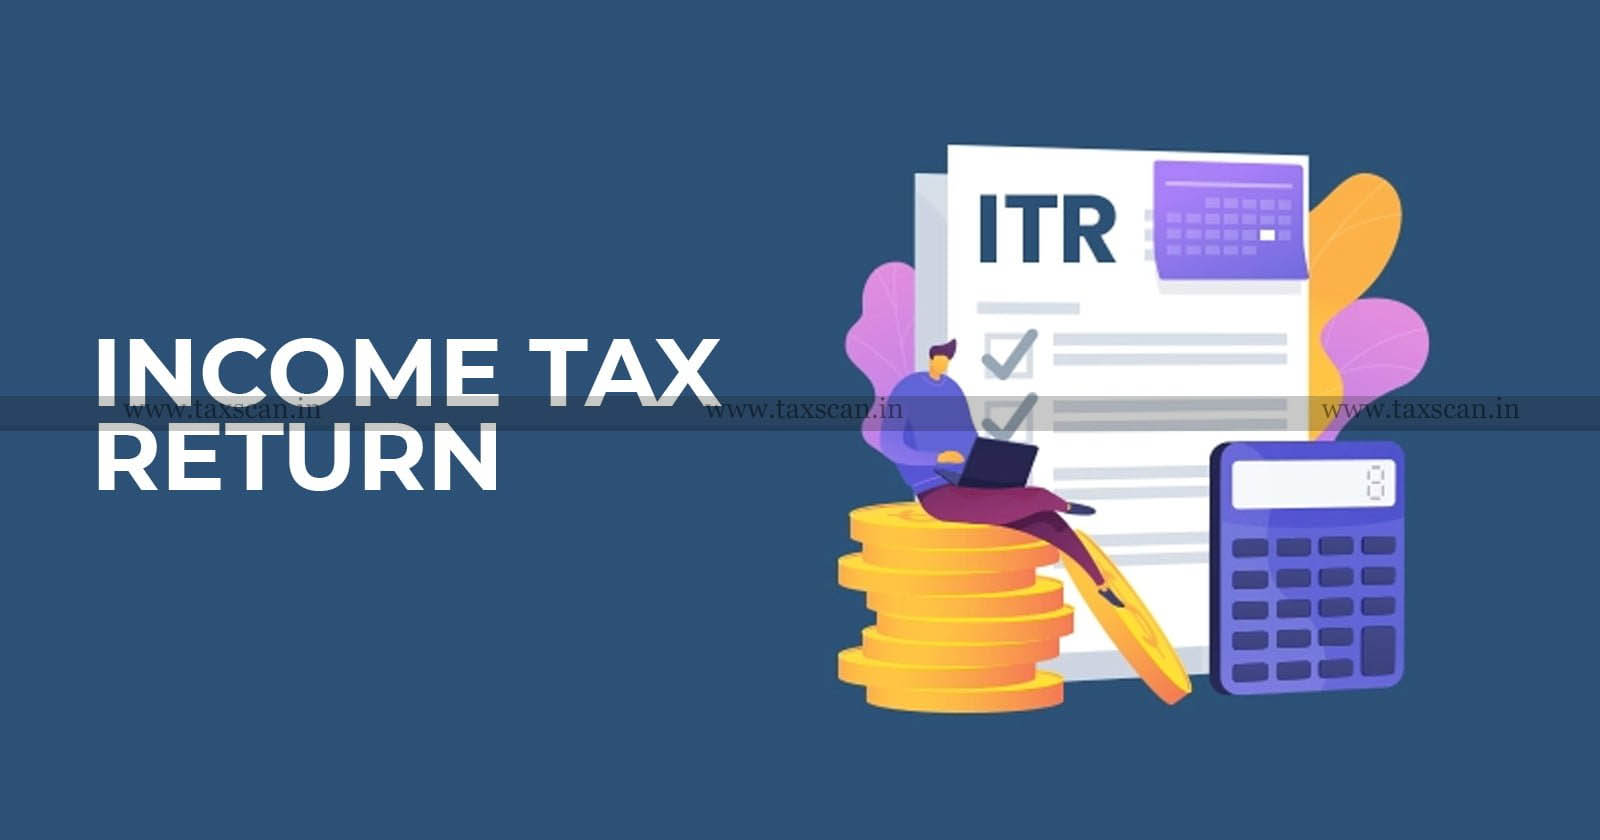 CBDT - CBDT Guidelines - Income Tax Returns - Income Tax - Ministry of Finance - TAXSCAN